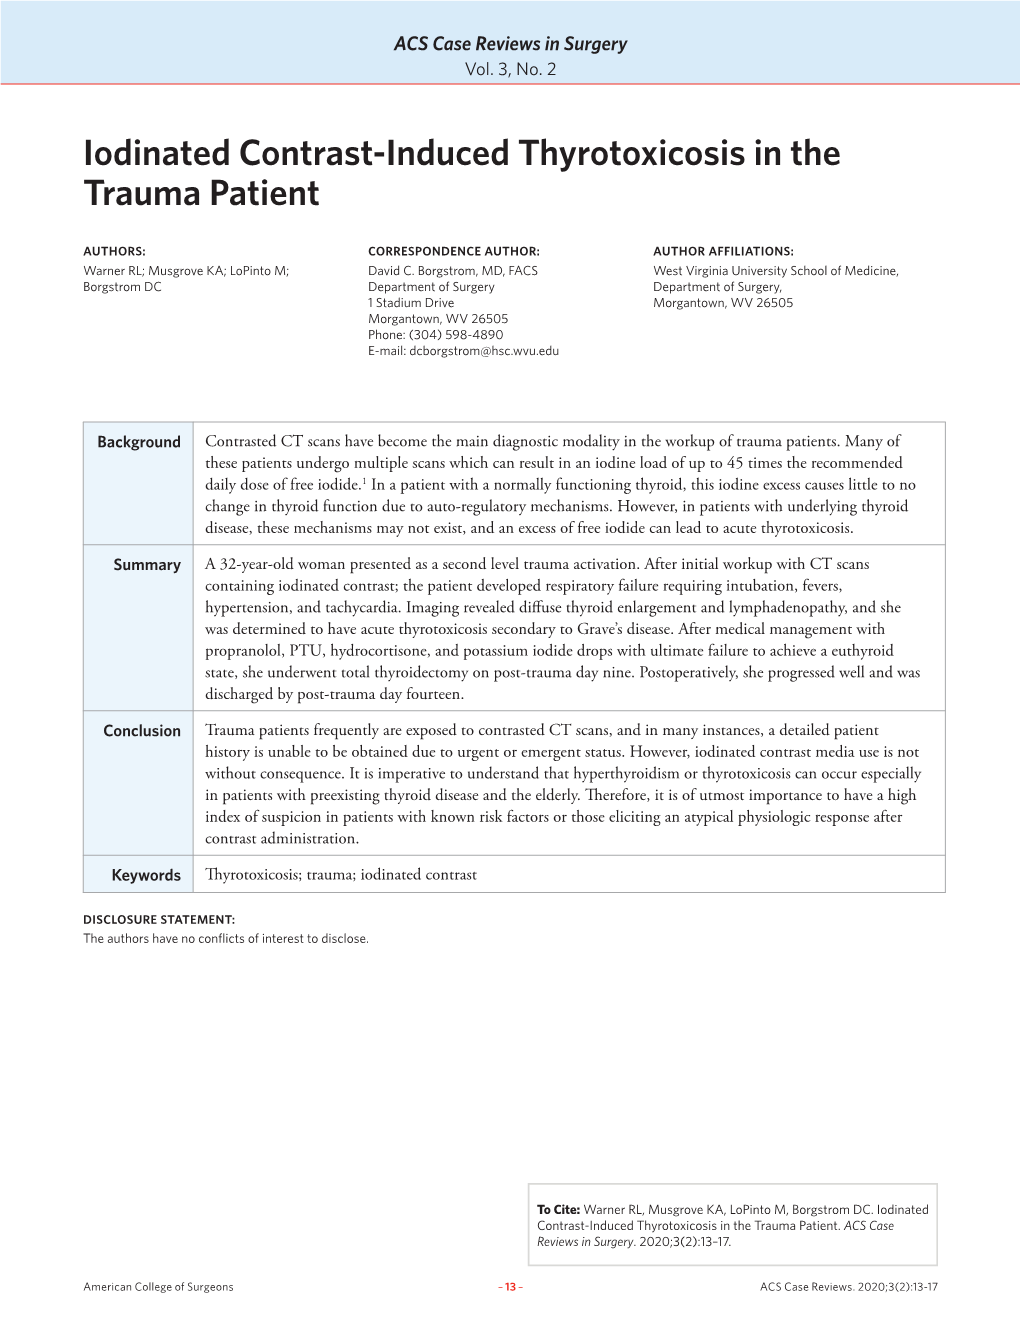 Iodinated Contrast-Induced Thyrotoxicosis in the Trauma Patient